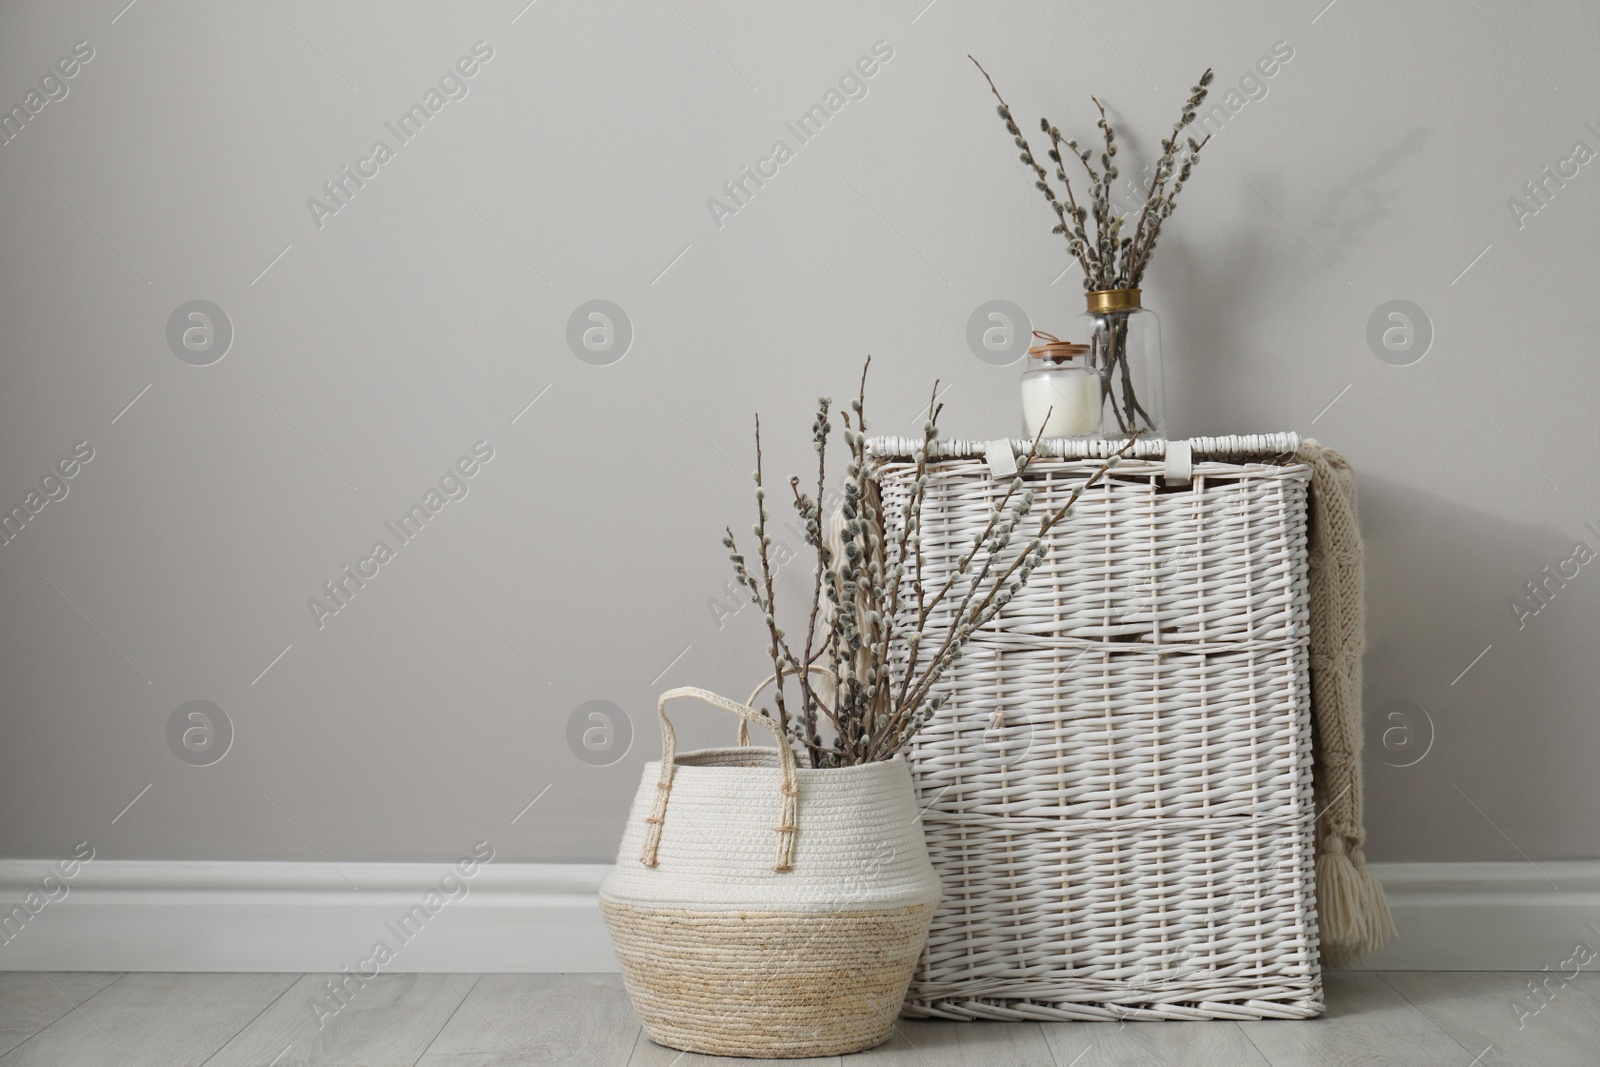 Photo of Fresh pussy willow branches and wicker baskets indoors. Space for text